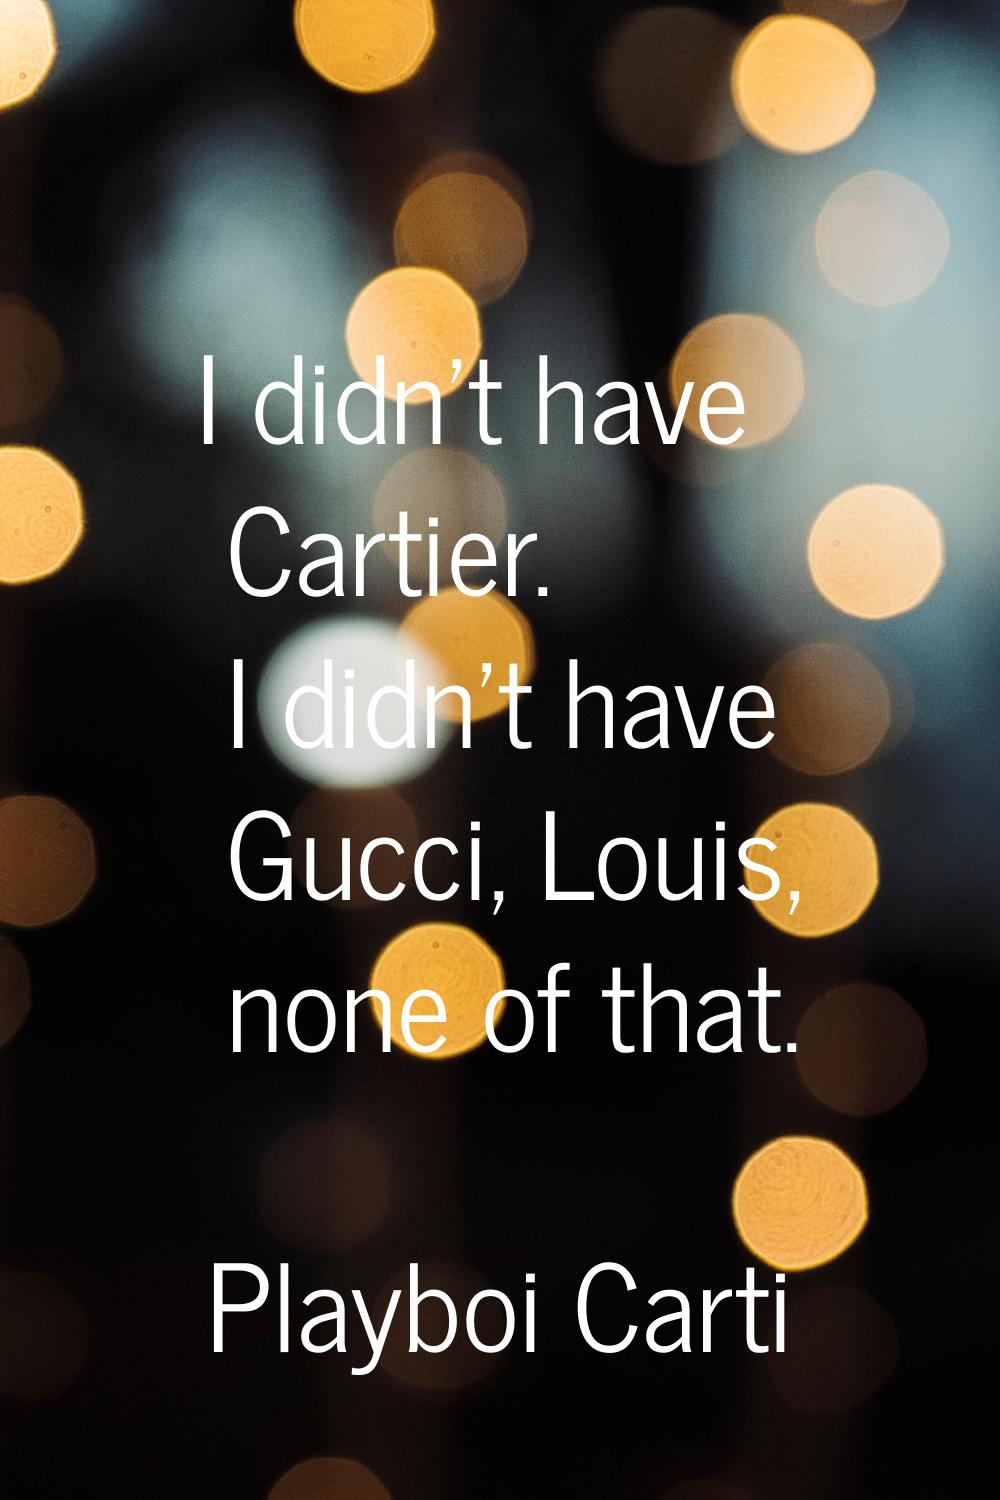 I didn't have Cartier. I didn't have Gucci, Louis, none of that.